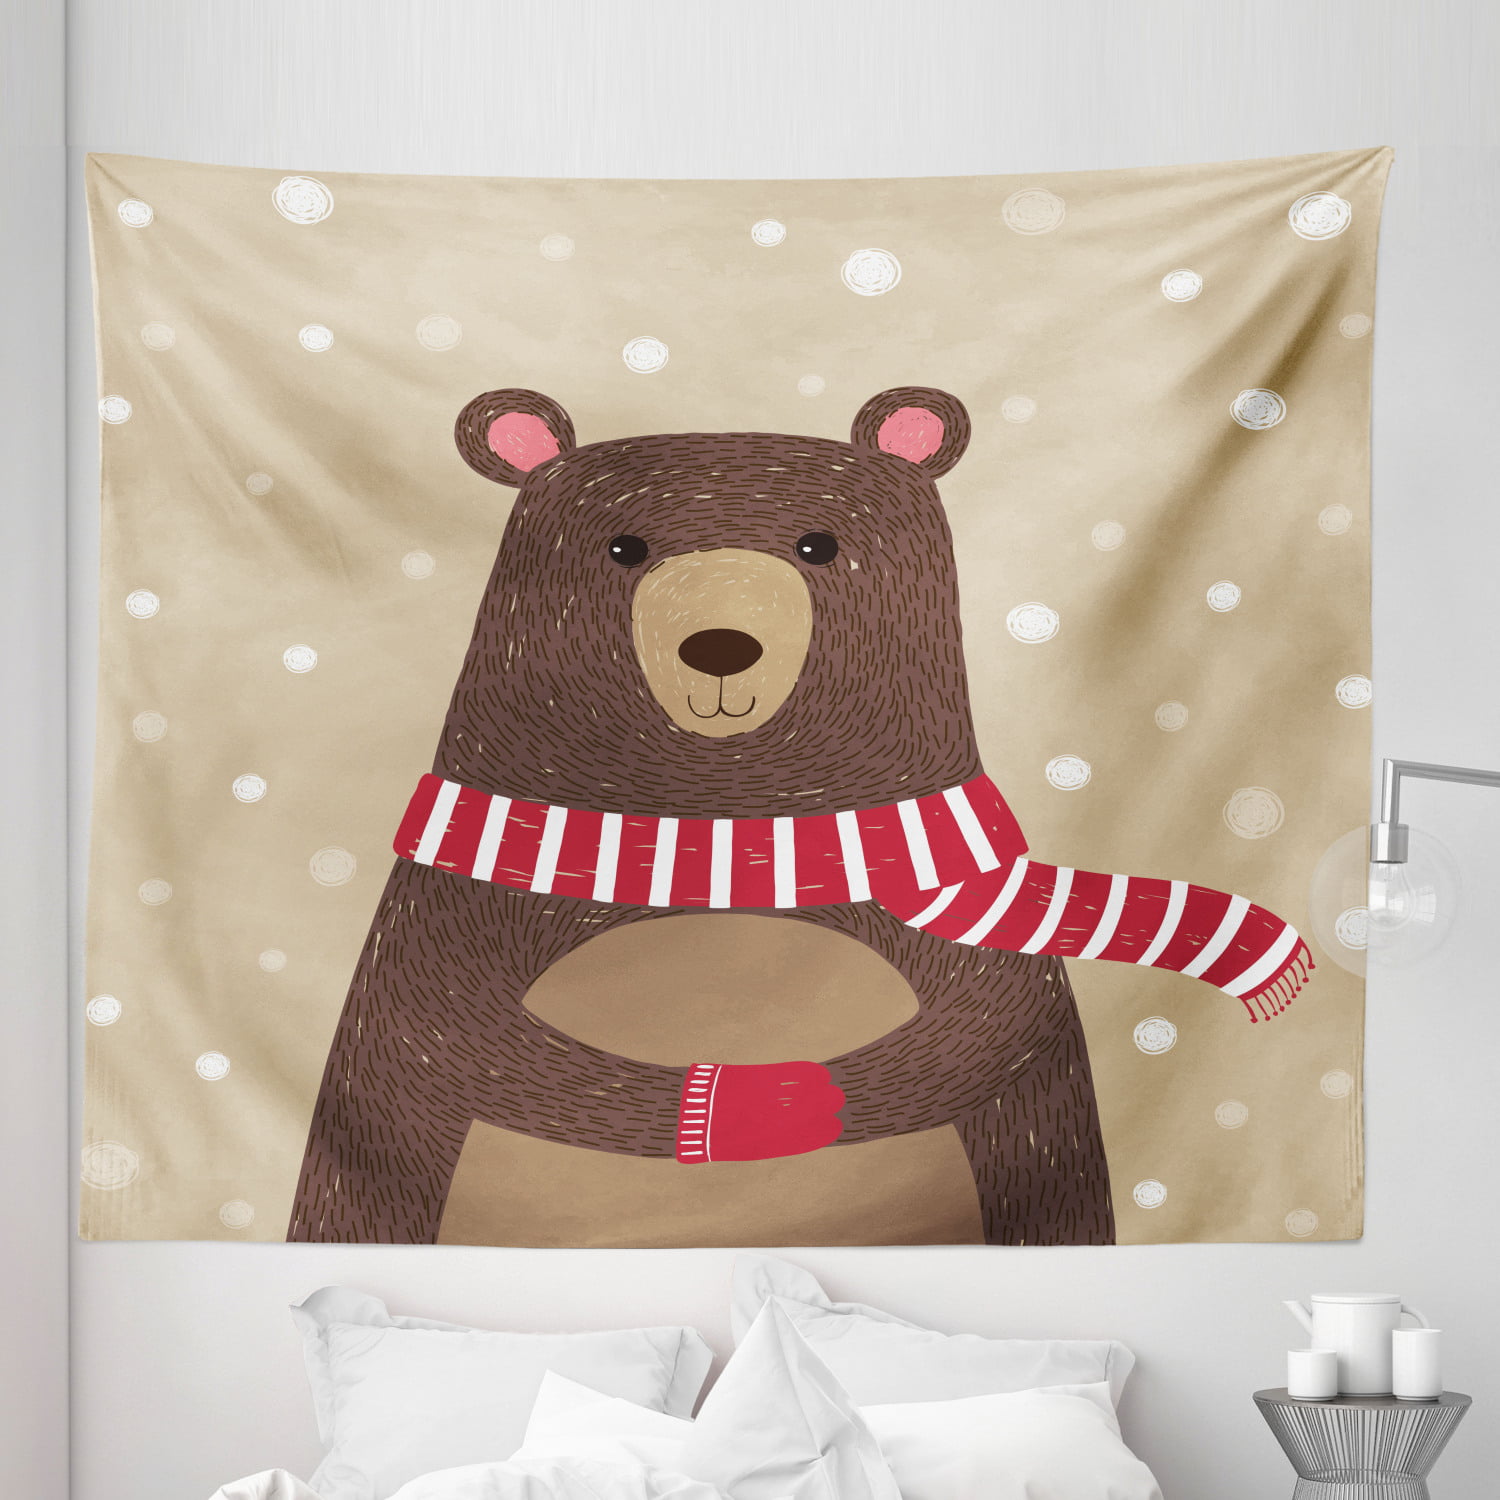 Bear Hippie Tapestry Anime Wall Art Hanging Cartoon Tapestry Bed Dorm Home Living Room Apartment Decor Tapestry Gifts 60 x 40 in A 